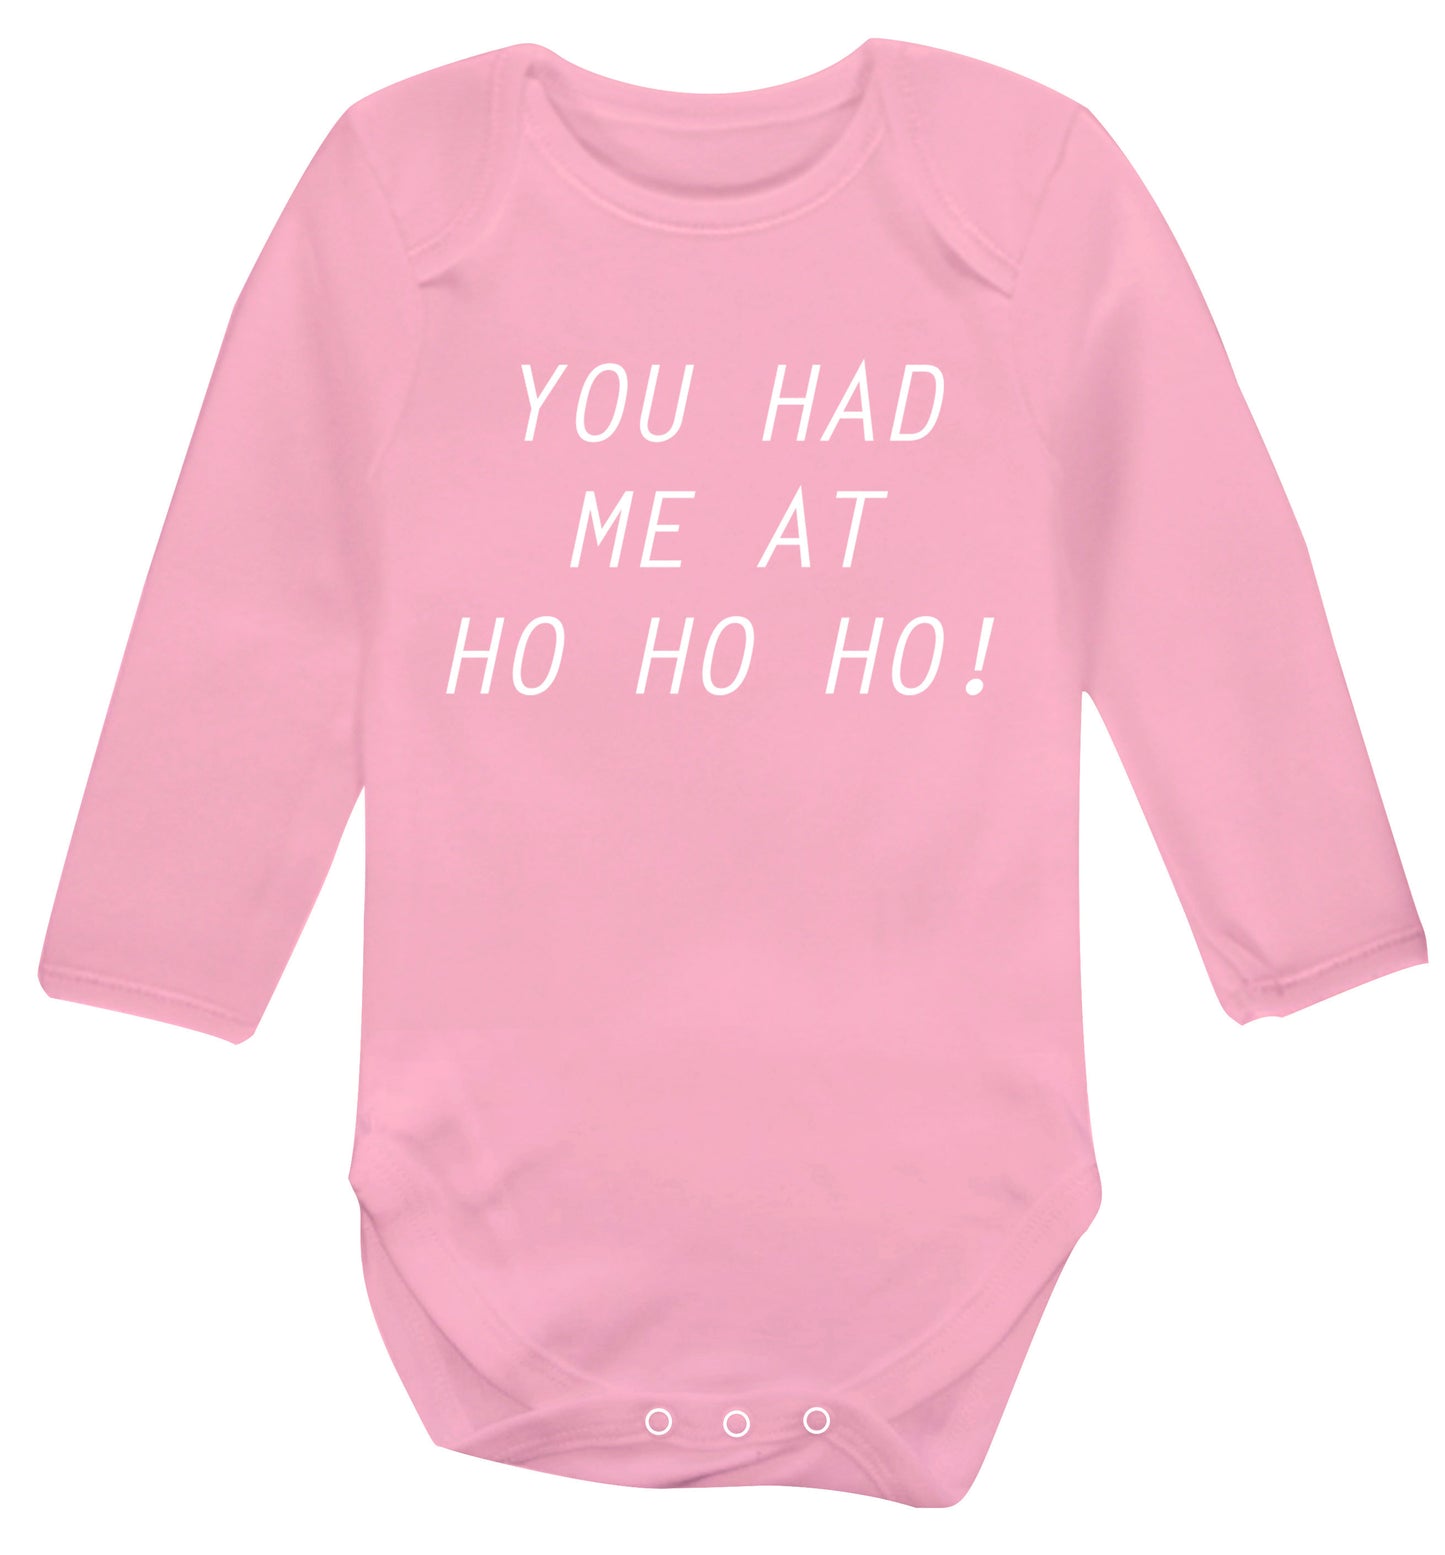 You had me at ho ho ho Baby Vest long sleeved pale pink 6-12 months